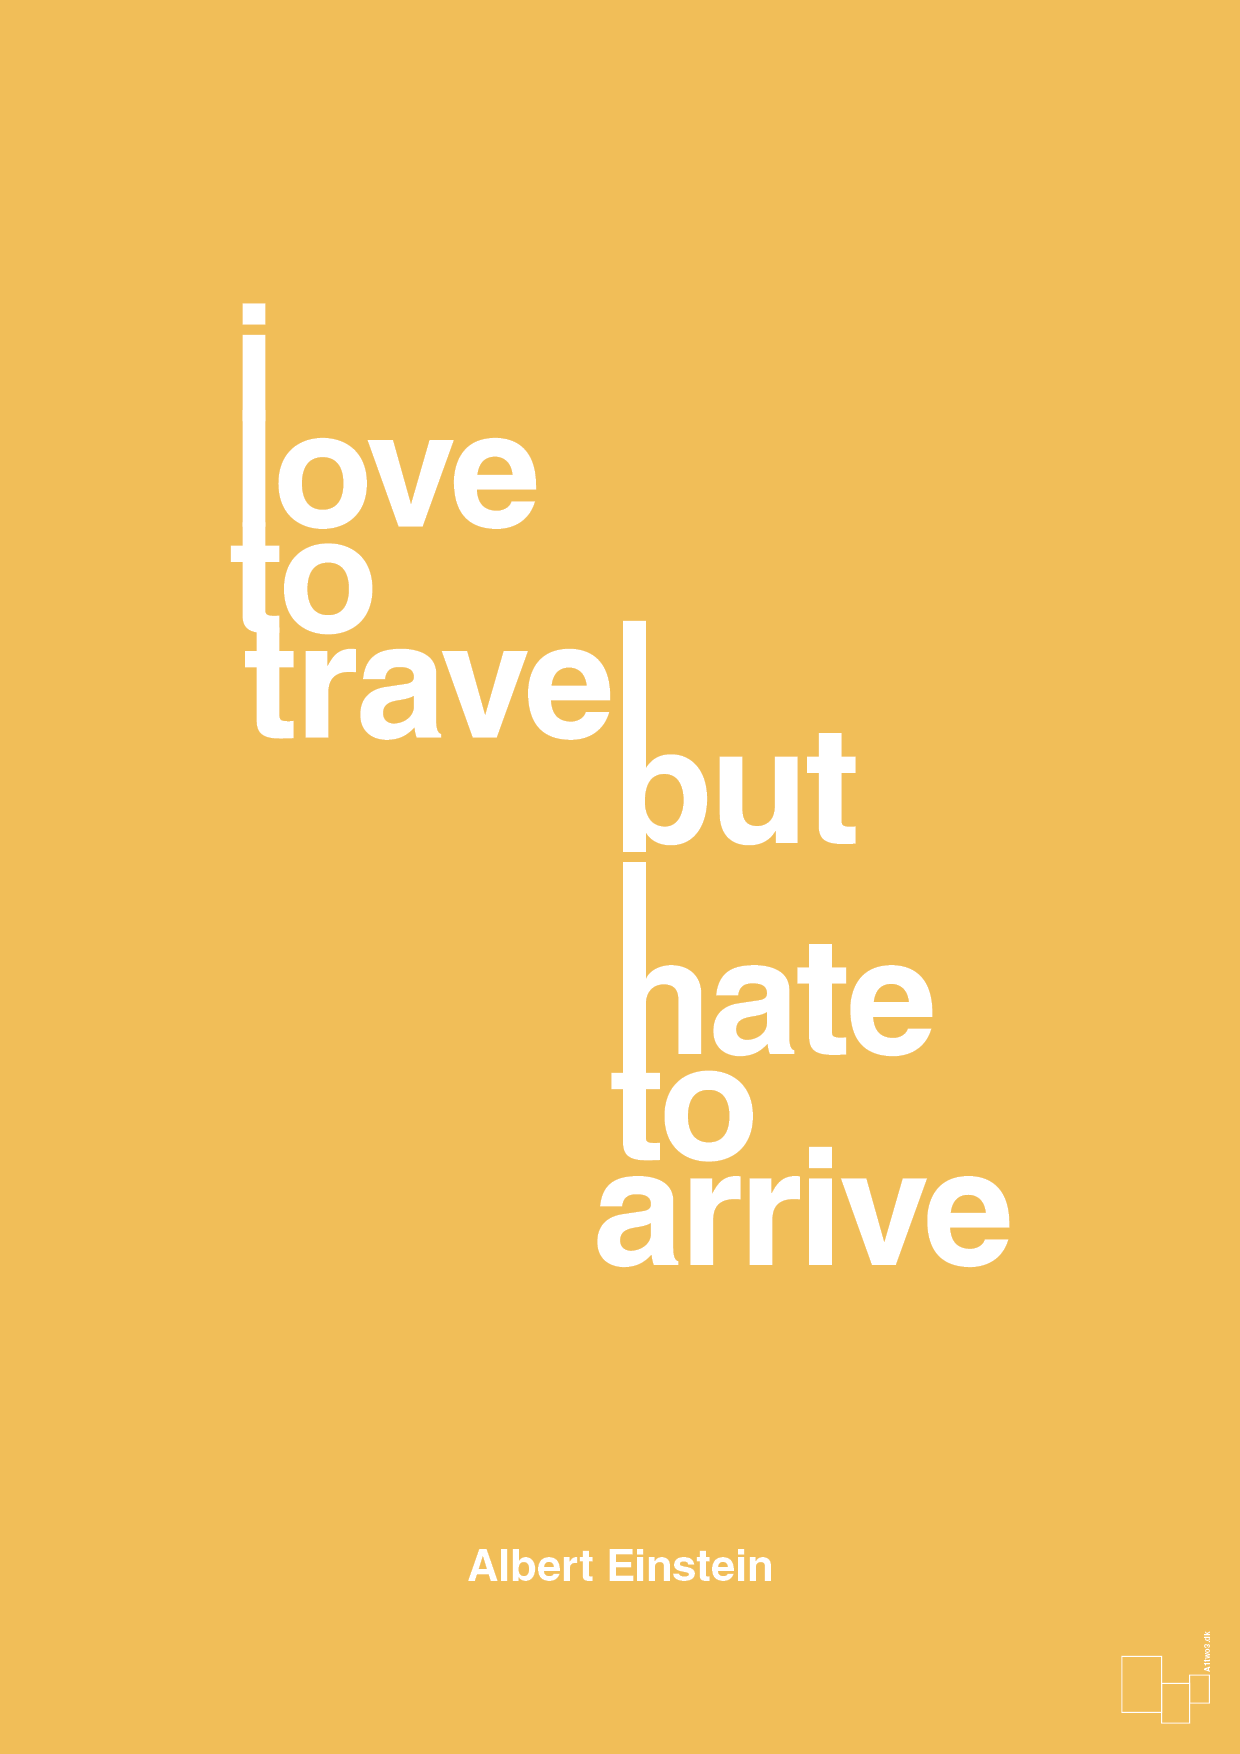 i love to travel but hate to arrive - Plakat med Citater i Honeycomb